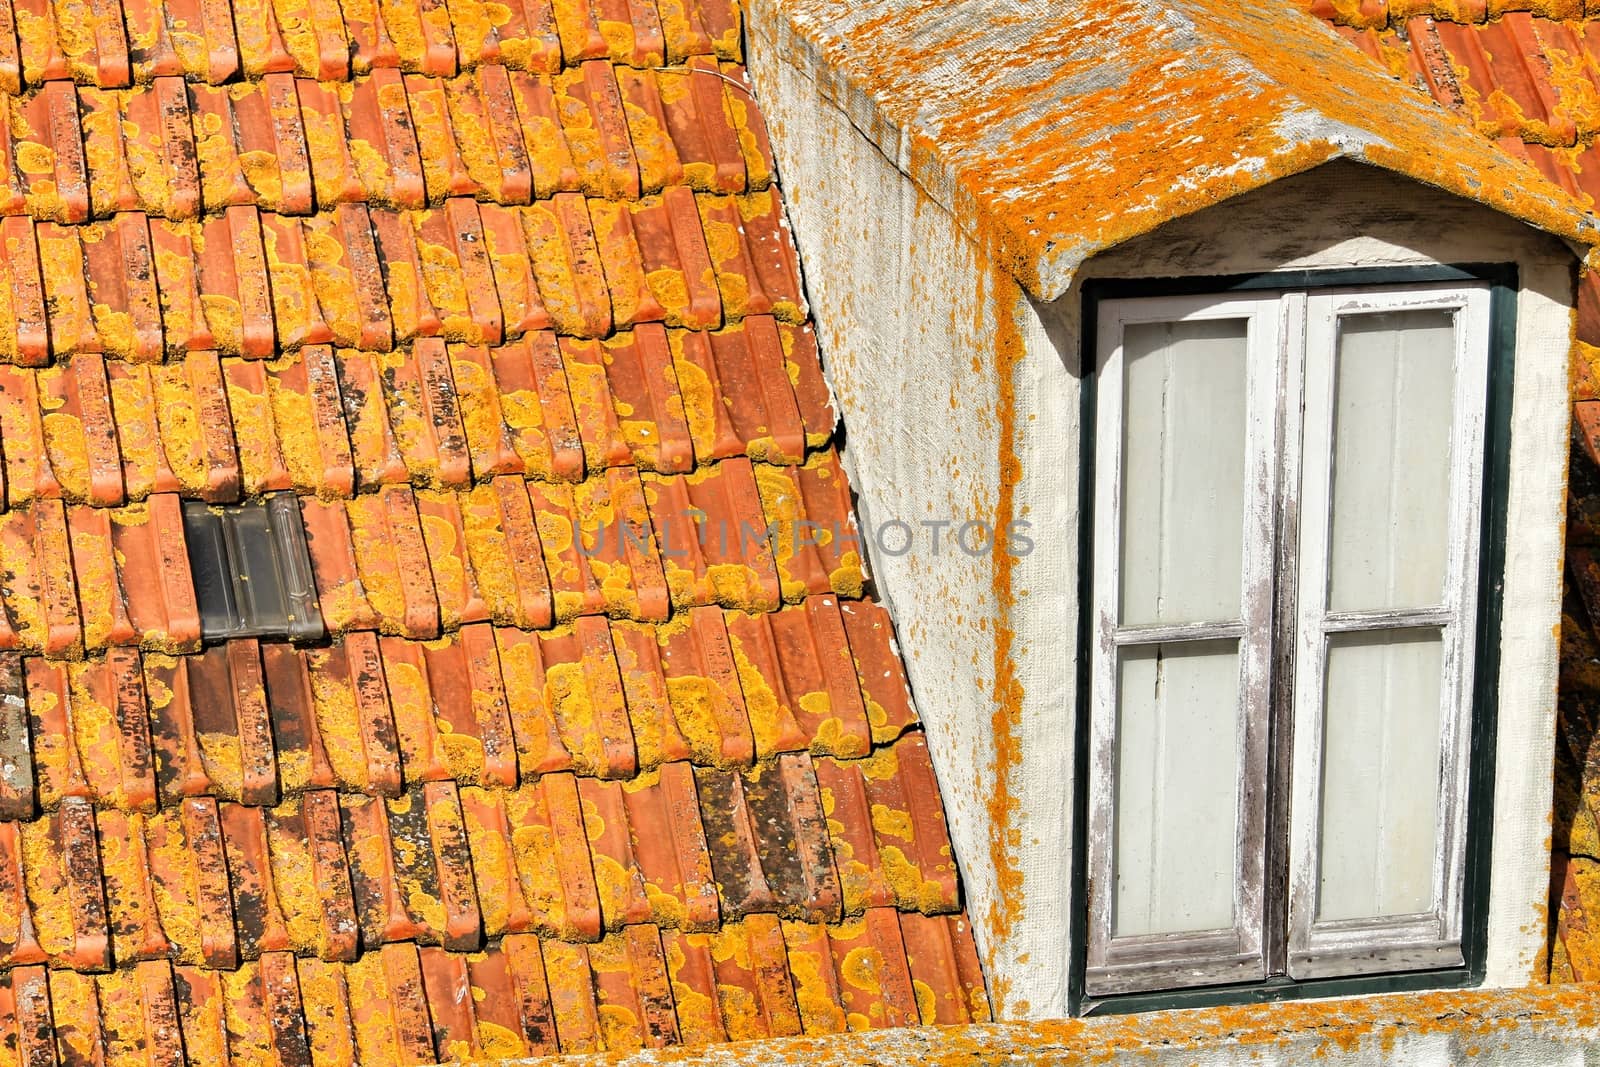 Old colorful and typical orange tiled roof in Lisbon, Portugal.